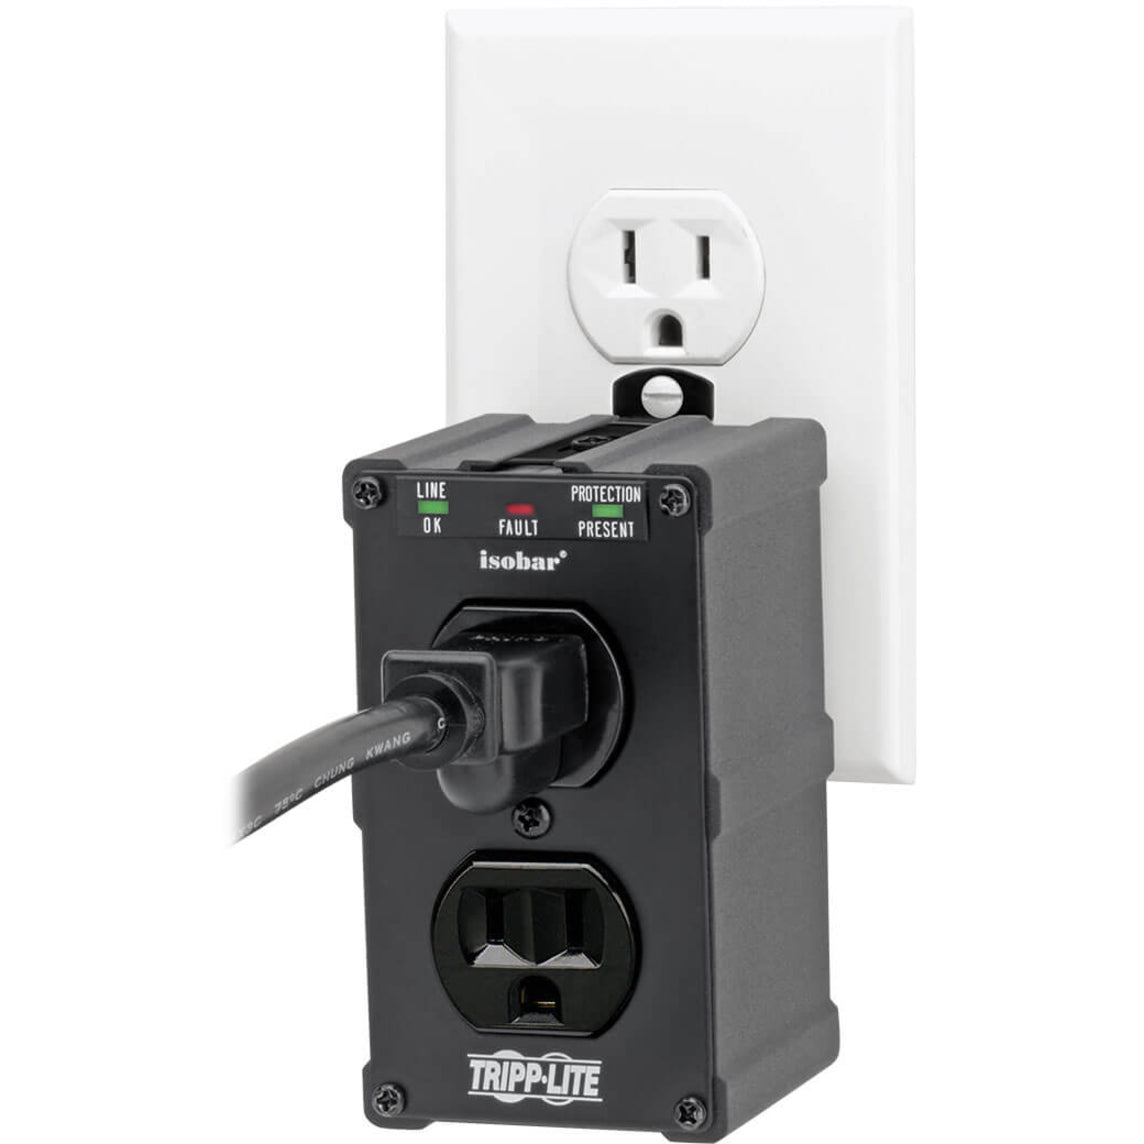 Tripp Lite ULTRABLOK428 Isobar Surge Protector Wall Mount Direct Plug In 2 Out 1410 Jle, Lifetime Warranty, Ideal for Home and Office